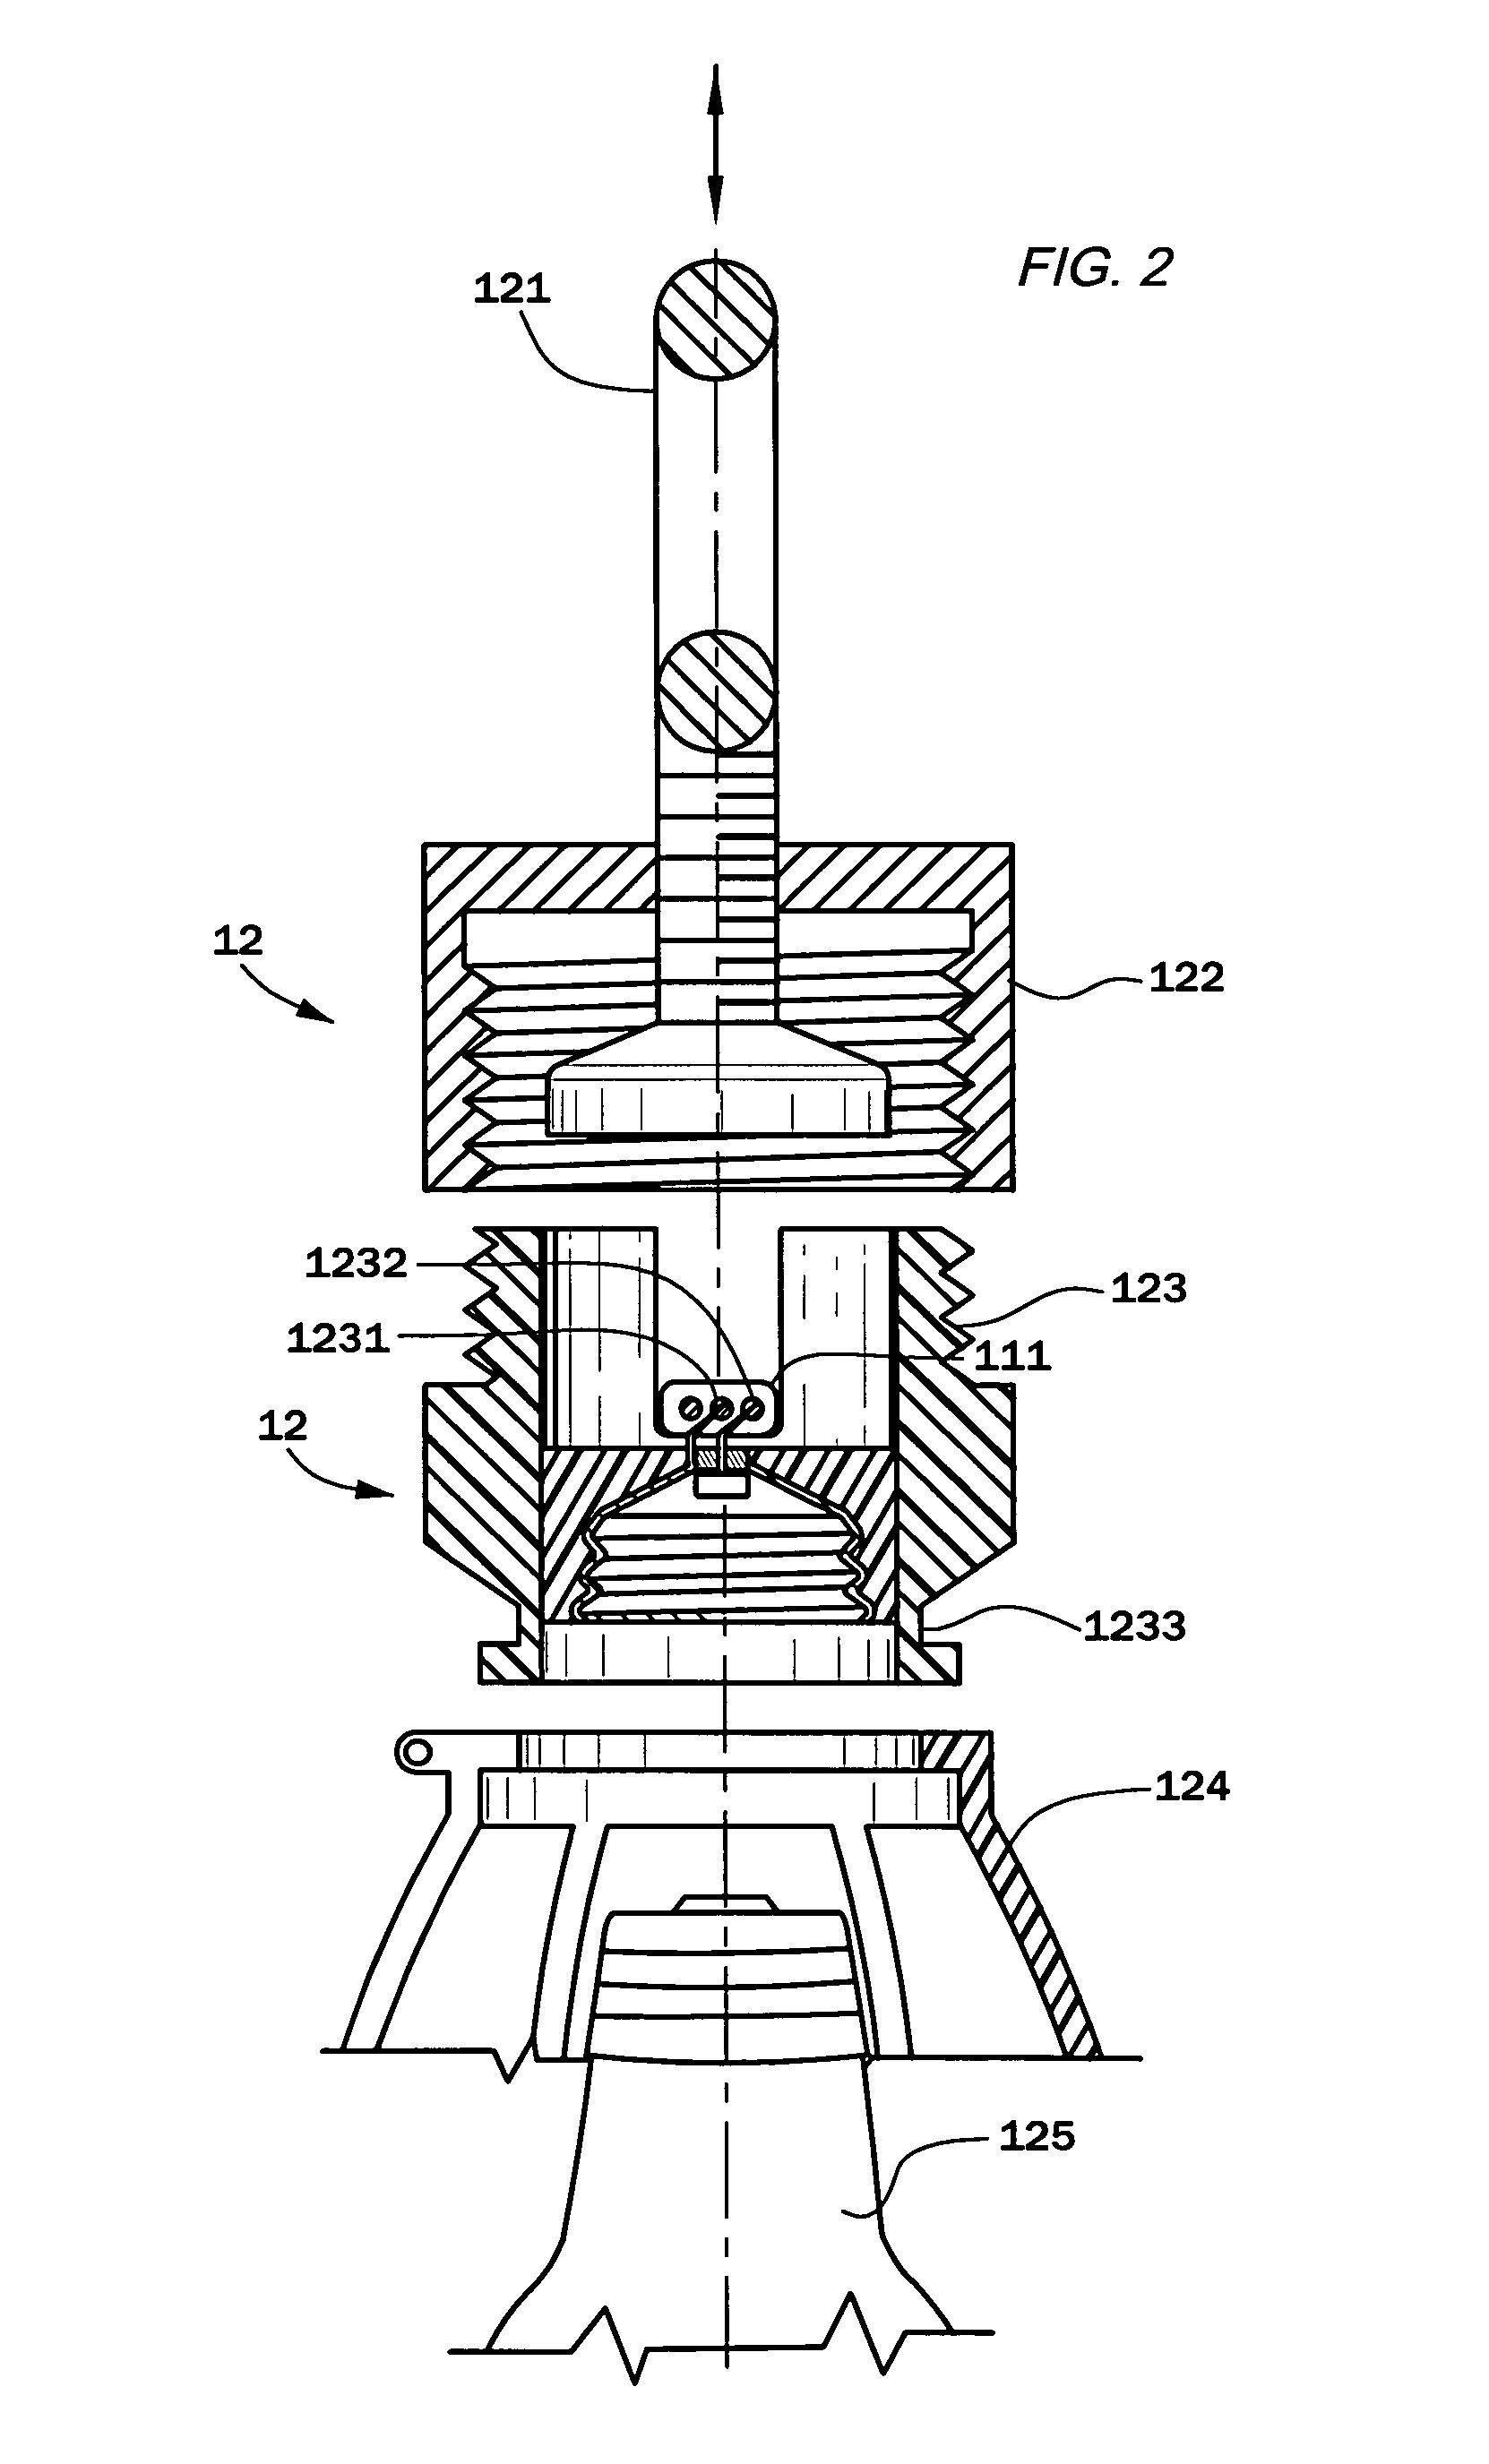 Temporary work light string with variably-positionable and re-positionable readily-replaced lamp, optionally with integral hangers, that are optionally electrically connected to plural electrical circuits